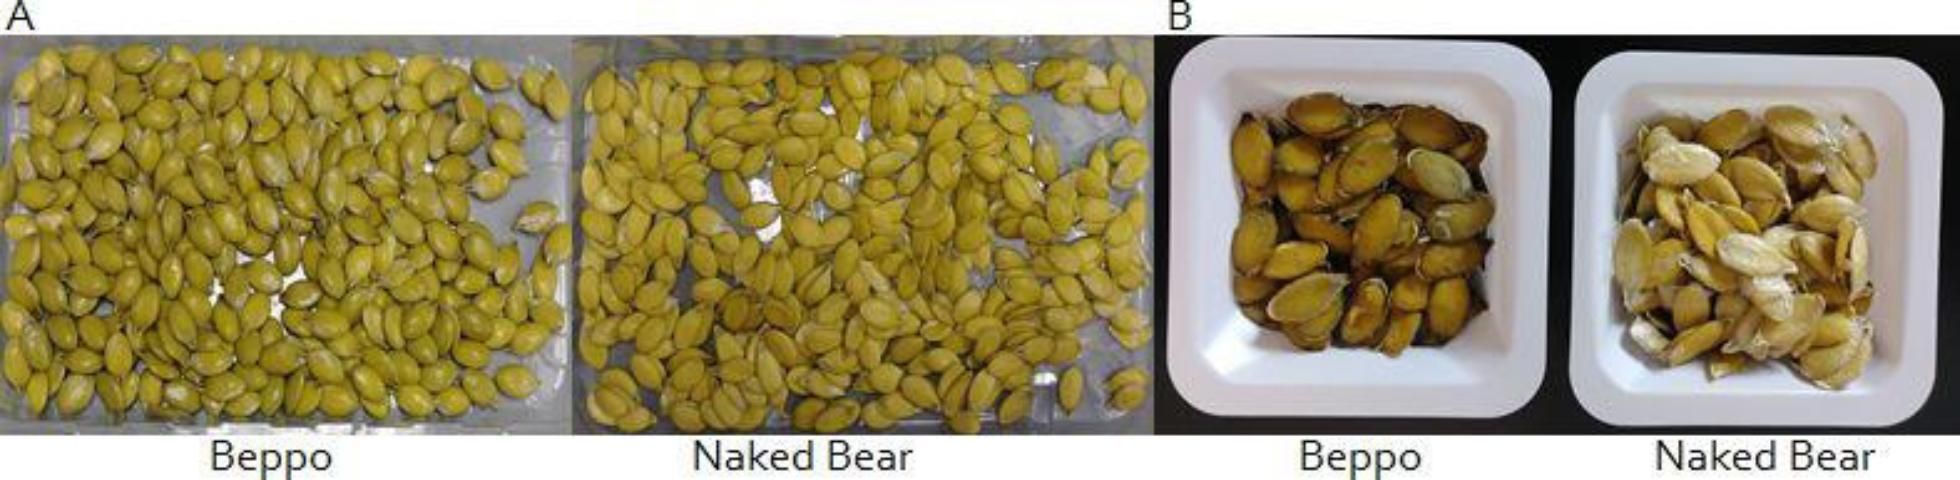 Figure 2. Freshly harvested seeds (A) and dried seeds (B) of 'Beppo' and 'Naked Bear' pumpkin cultivars.